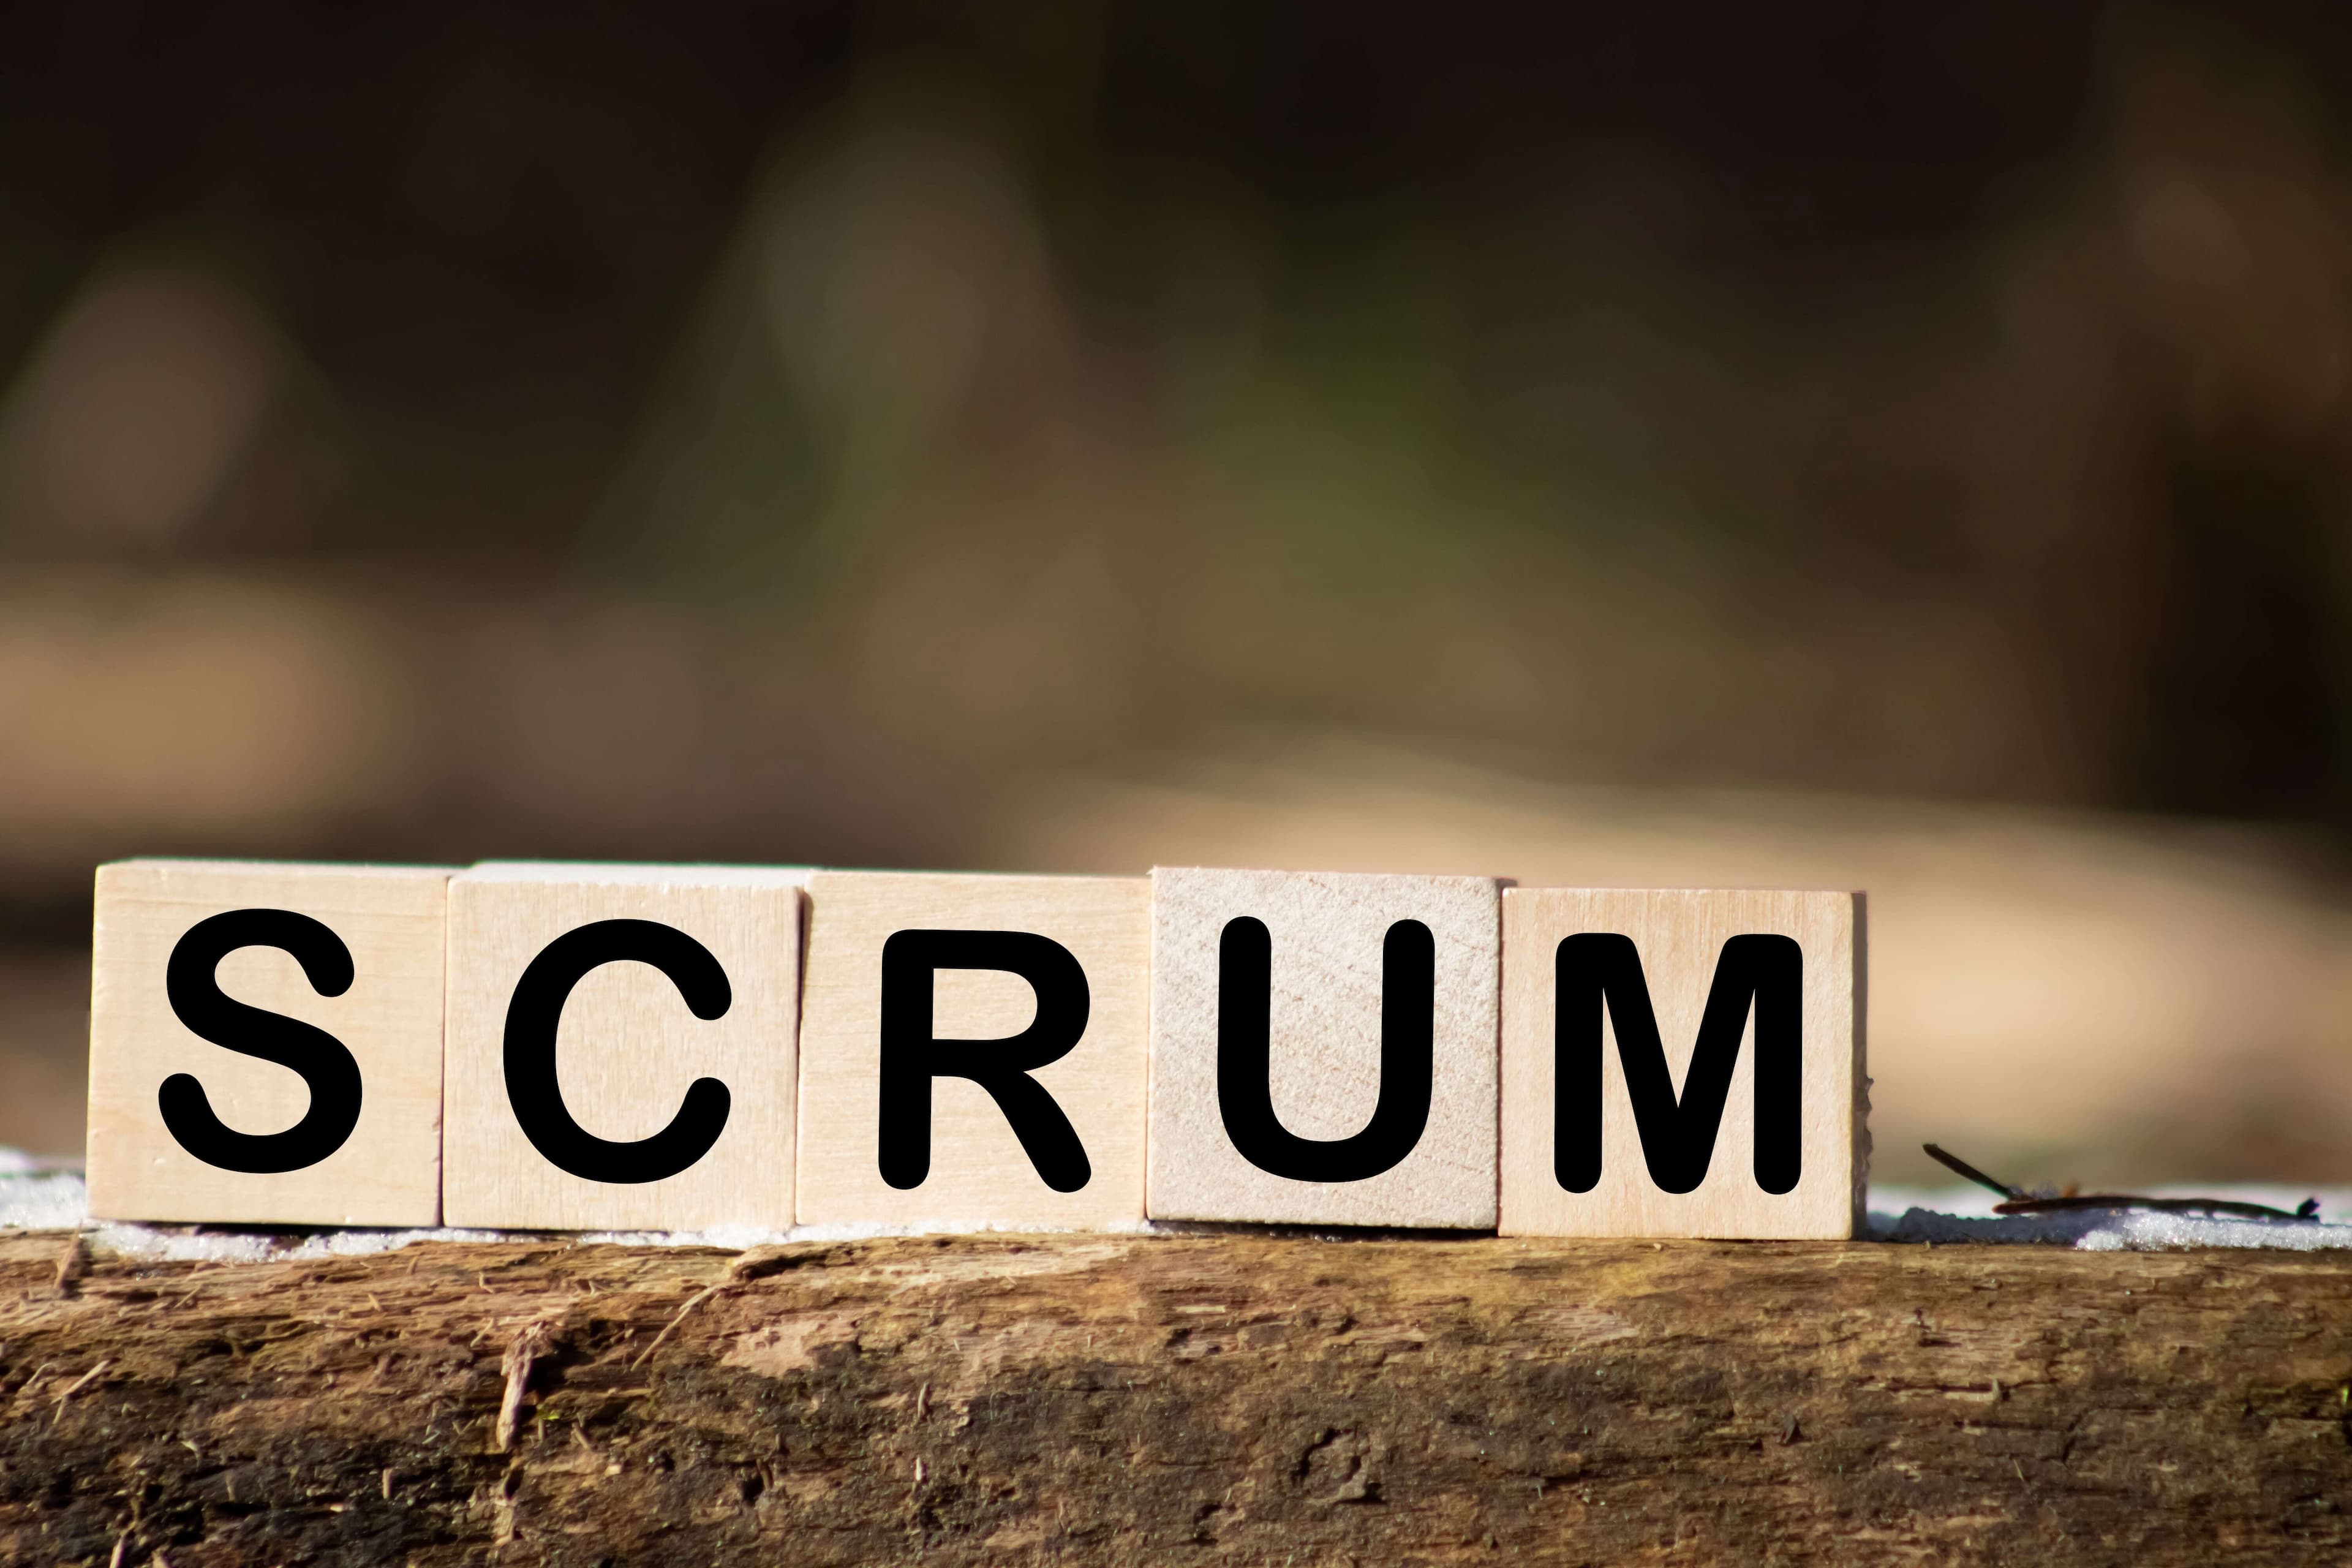 Are you a scrum team and not doing these? You're wrong